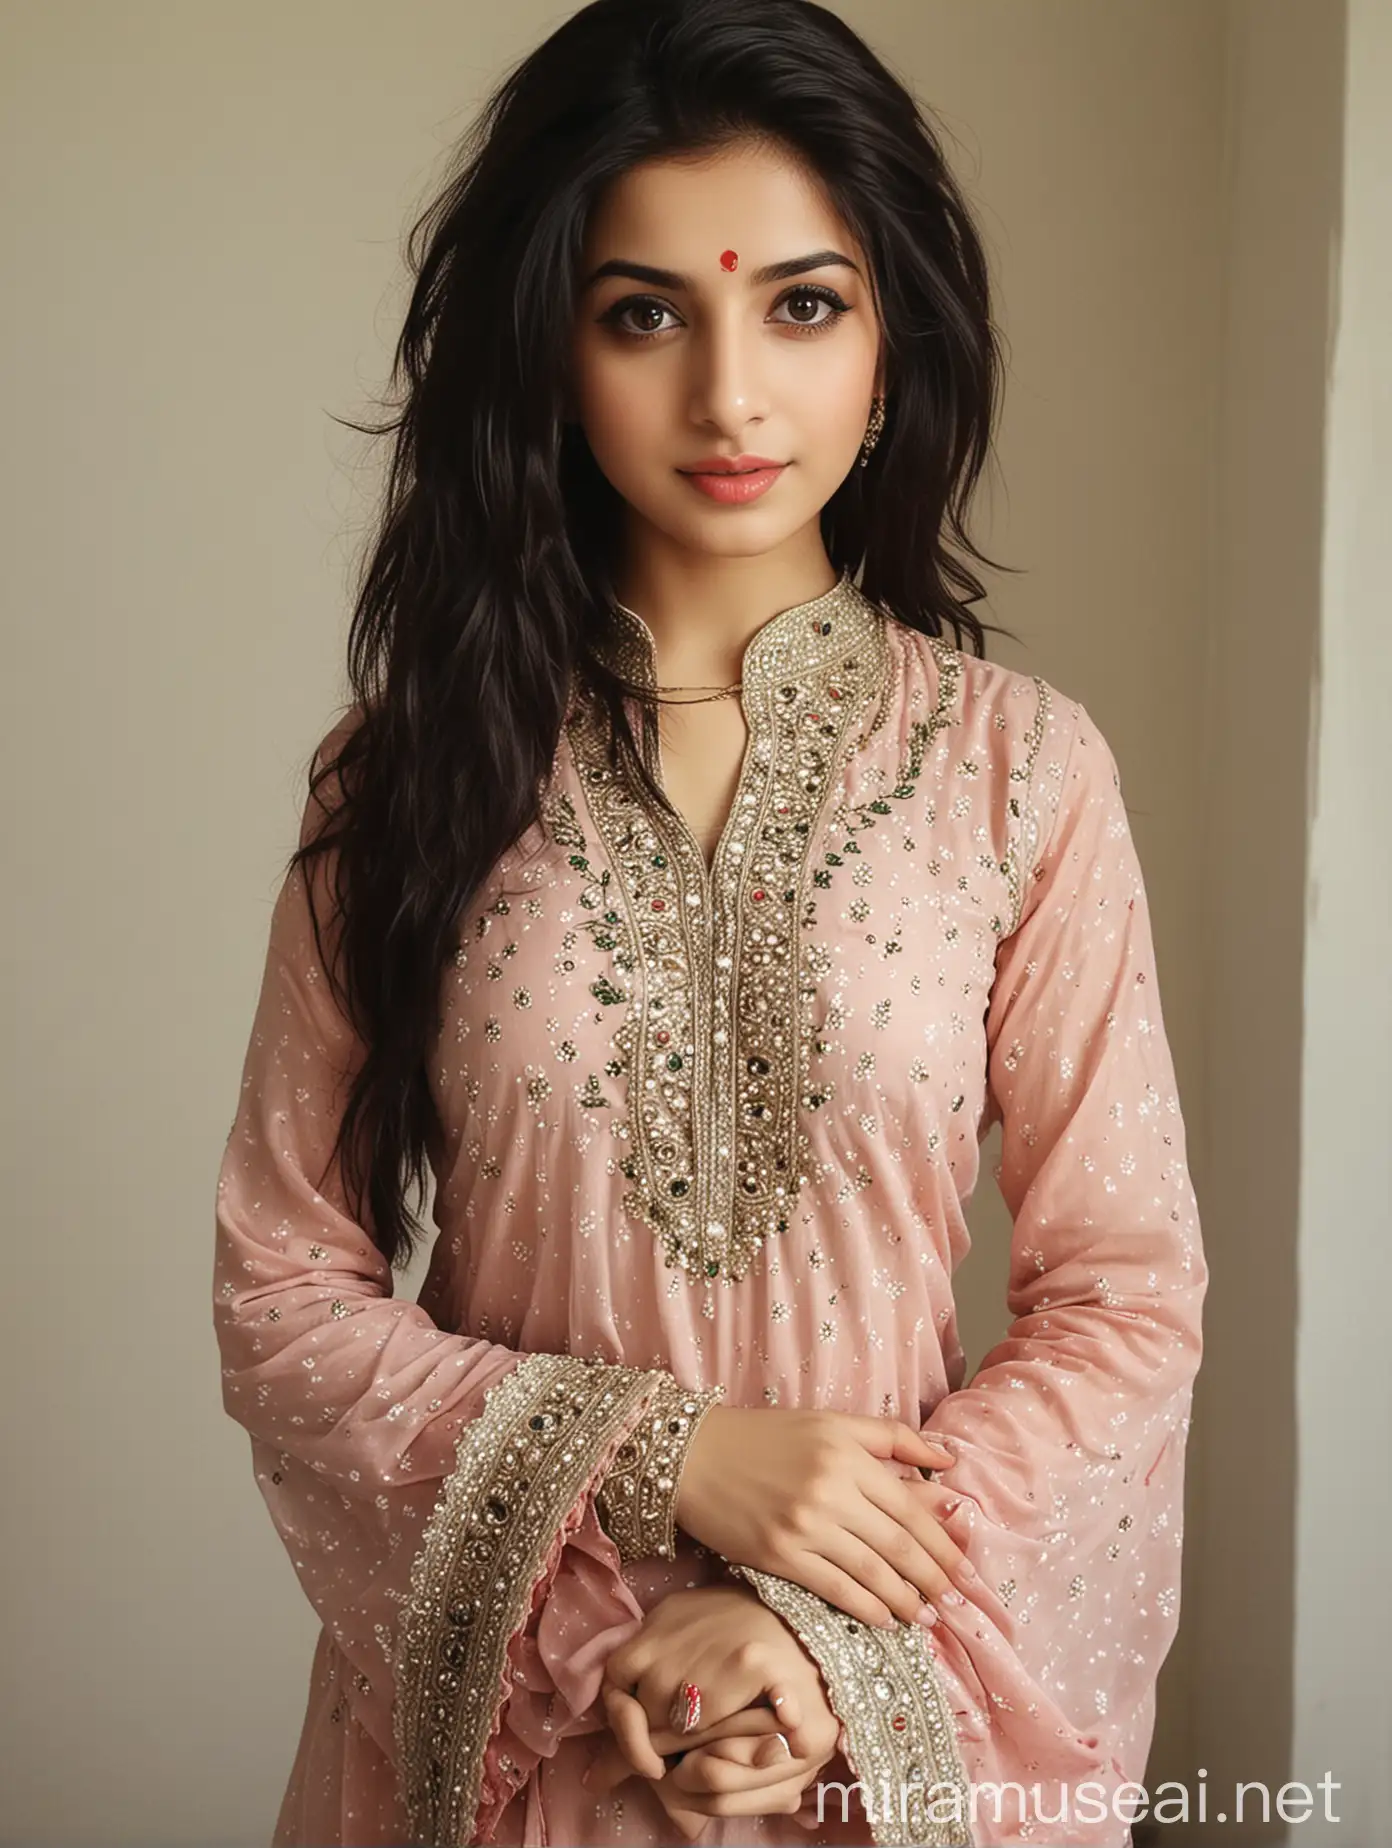 Charming Pakistani Girl in Exquisite Indian Attire